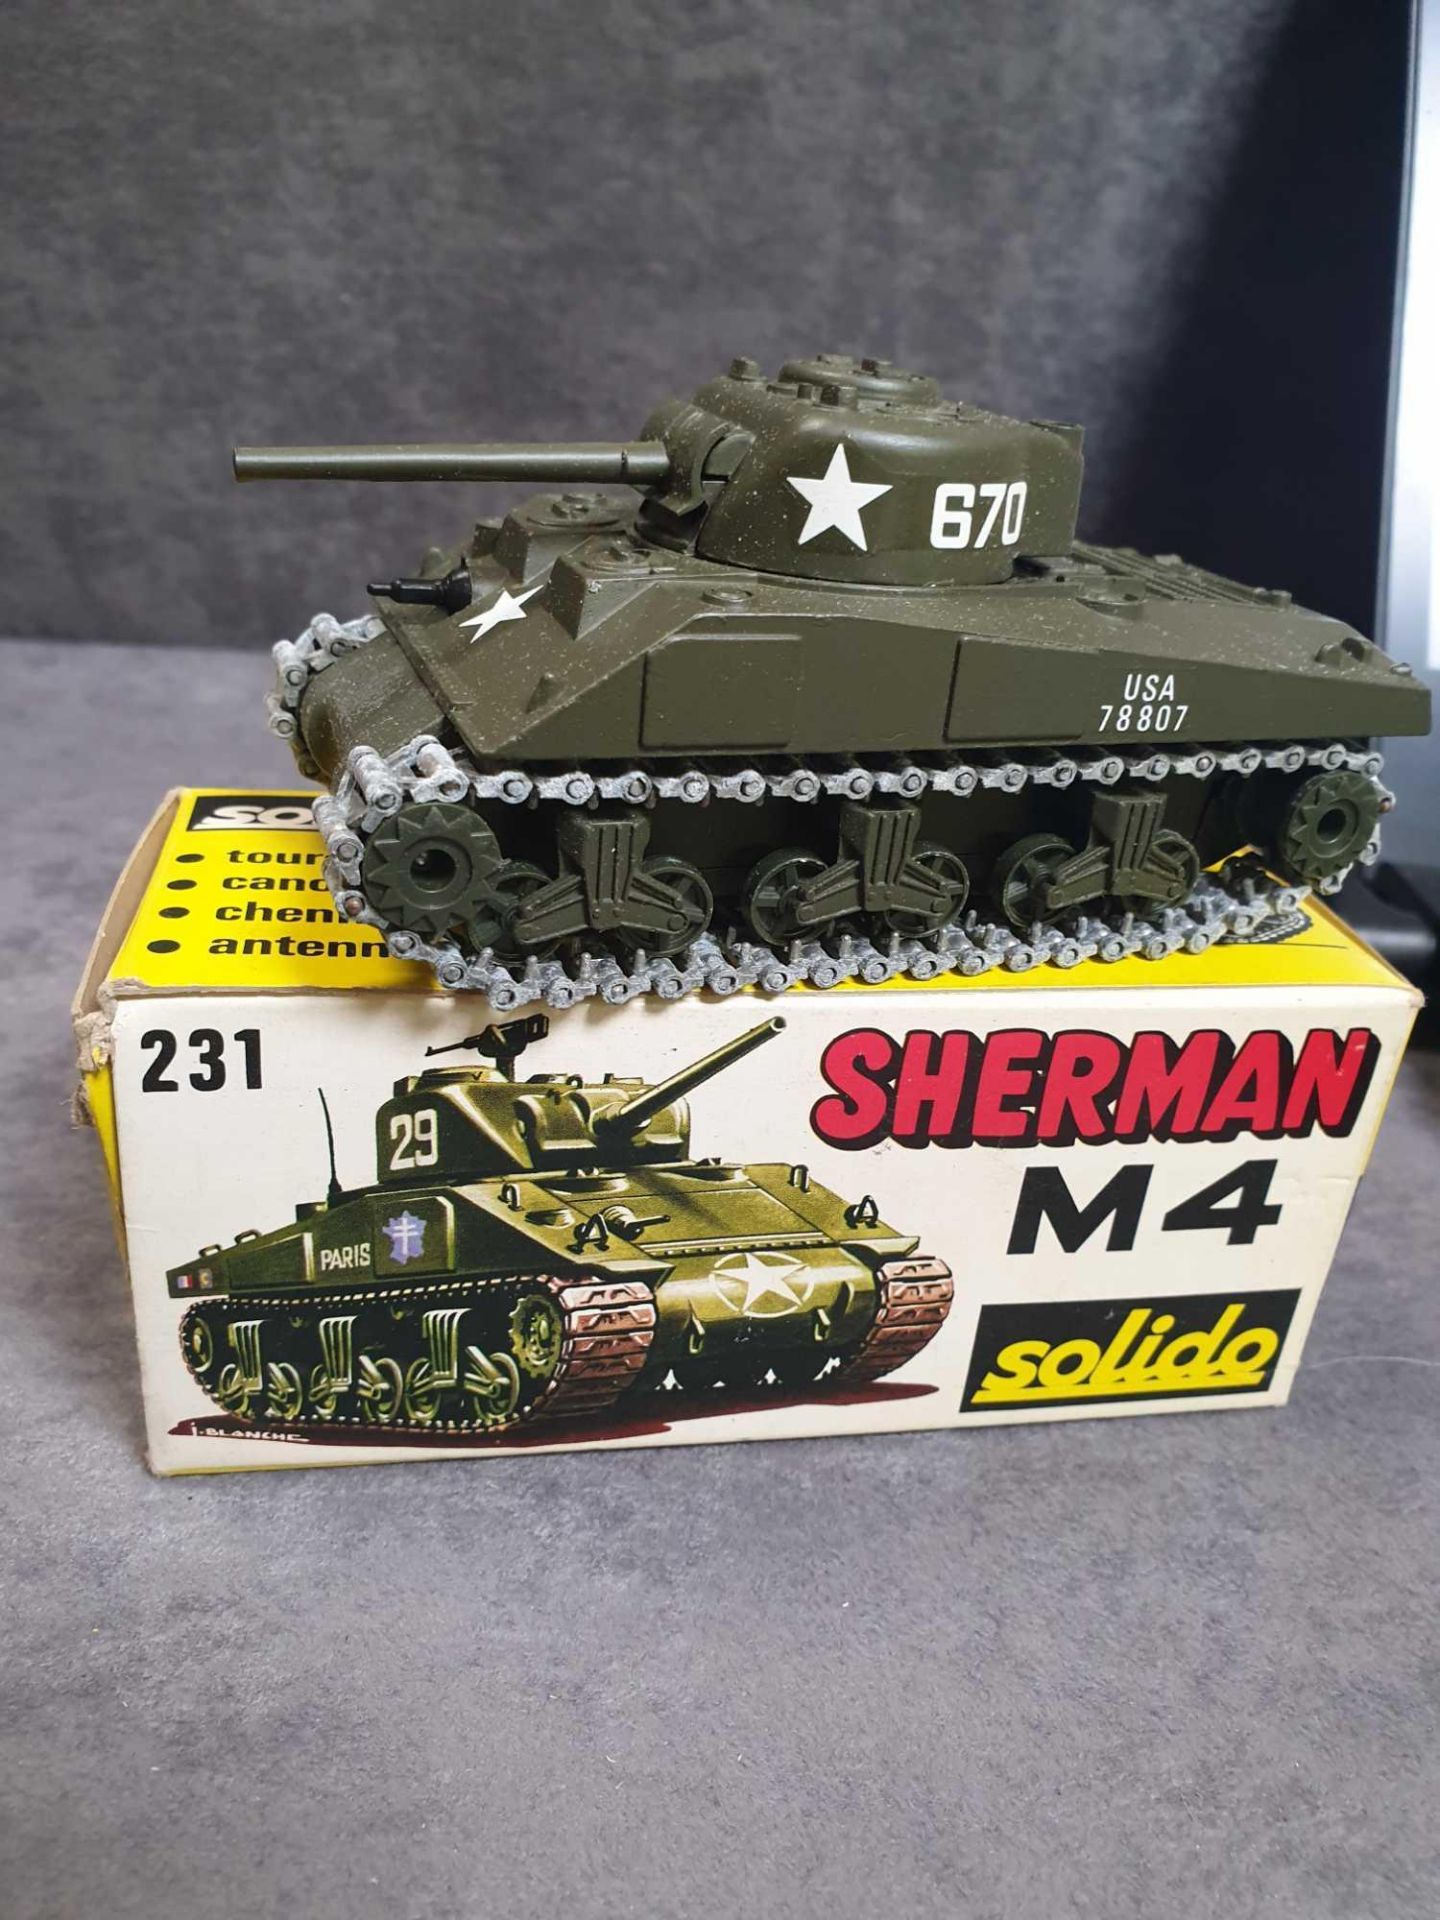 Mint Solido France Diecast # 231 Sherman Tank M4 M 4 A3 3/1972 France Original #2 With excellent Box - Image 2 of 2